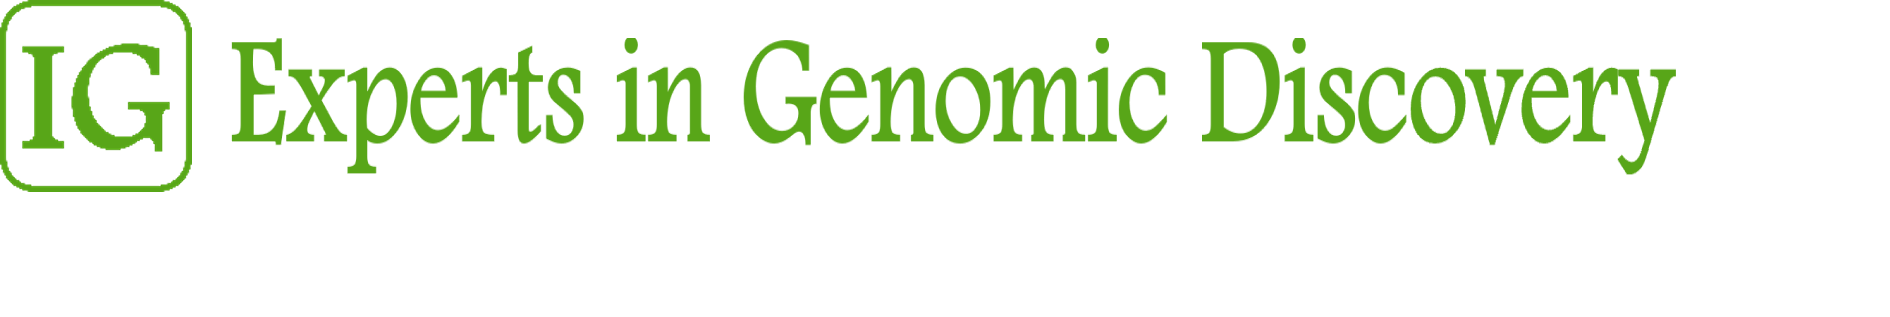 Experts in Genomic Discovery